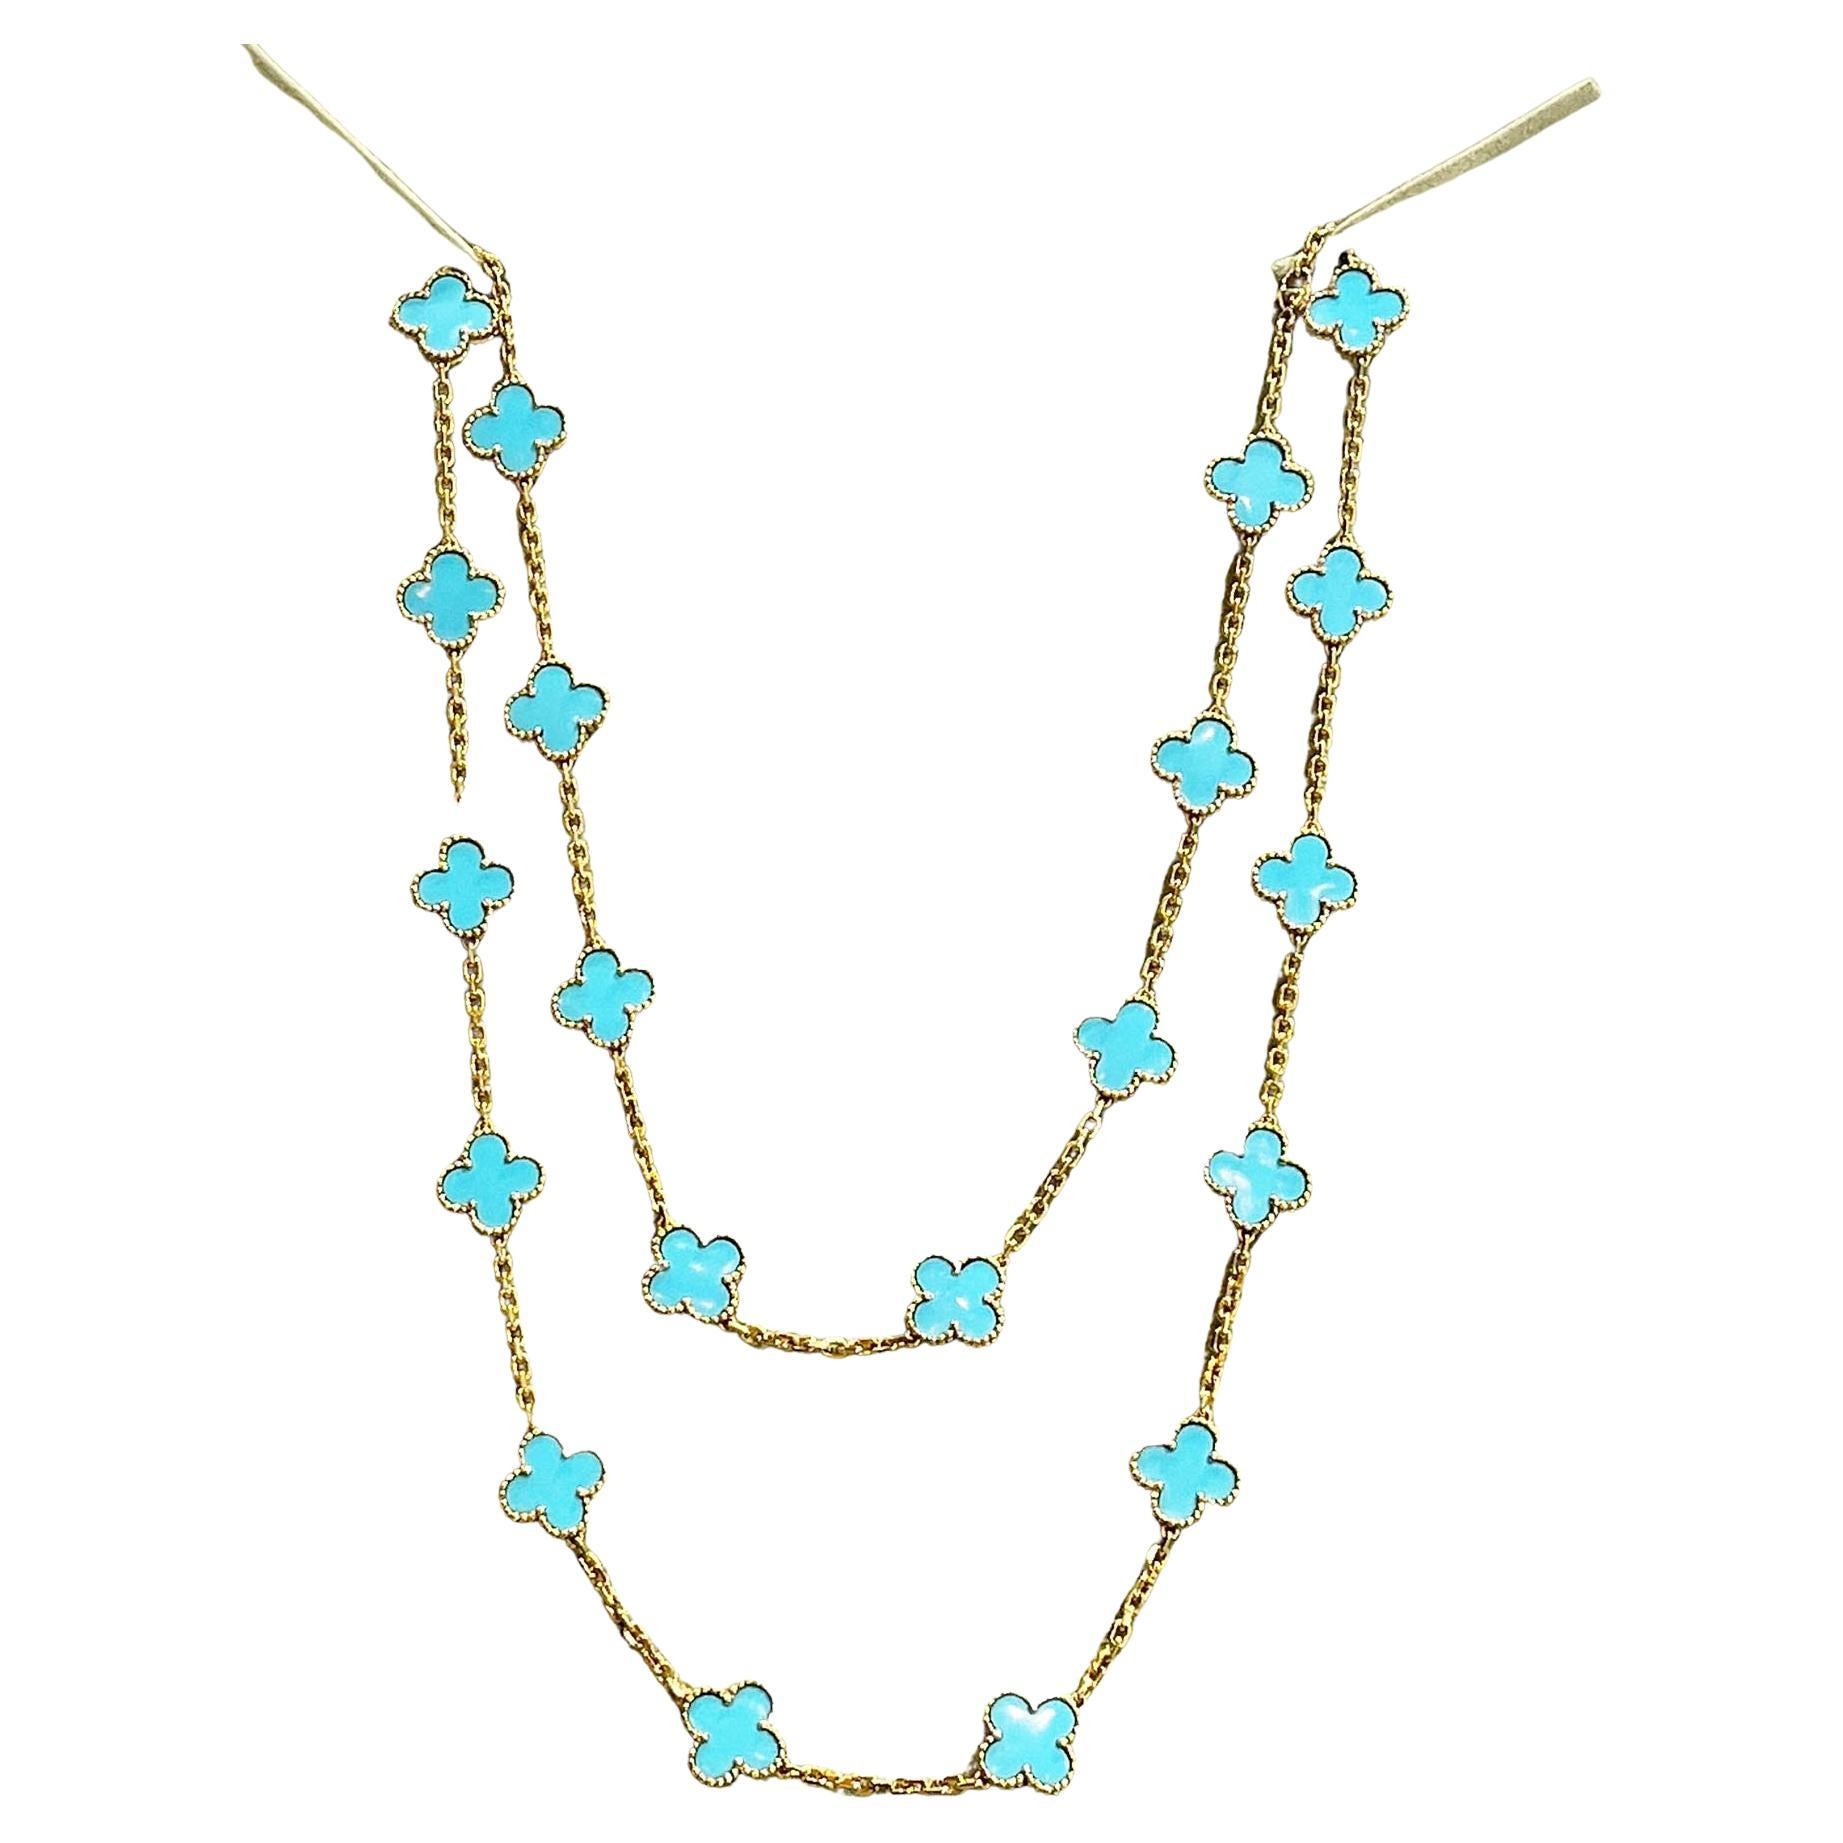 *EXTREMELY RARE & COLLECTIBLE * Van Cleef & Arpels Turquoise 20 Motif Alhambra Necklace in 18K Yellow Gold

Designer:  Van Cleef & Arpels 

Collection:  Vintage Alhambra

Style:  20 Motif Necklace

Metal Type: Yellow Gold 

Metal Purity: 18k

Stone: